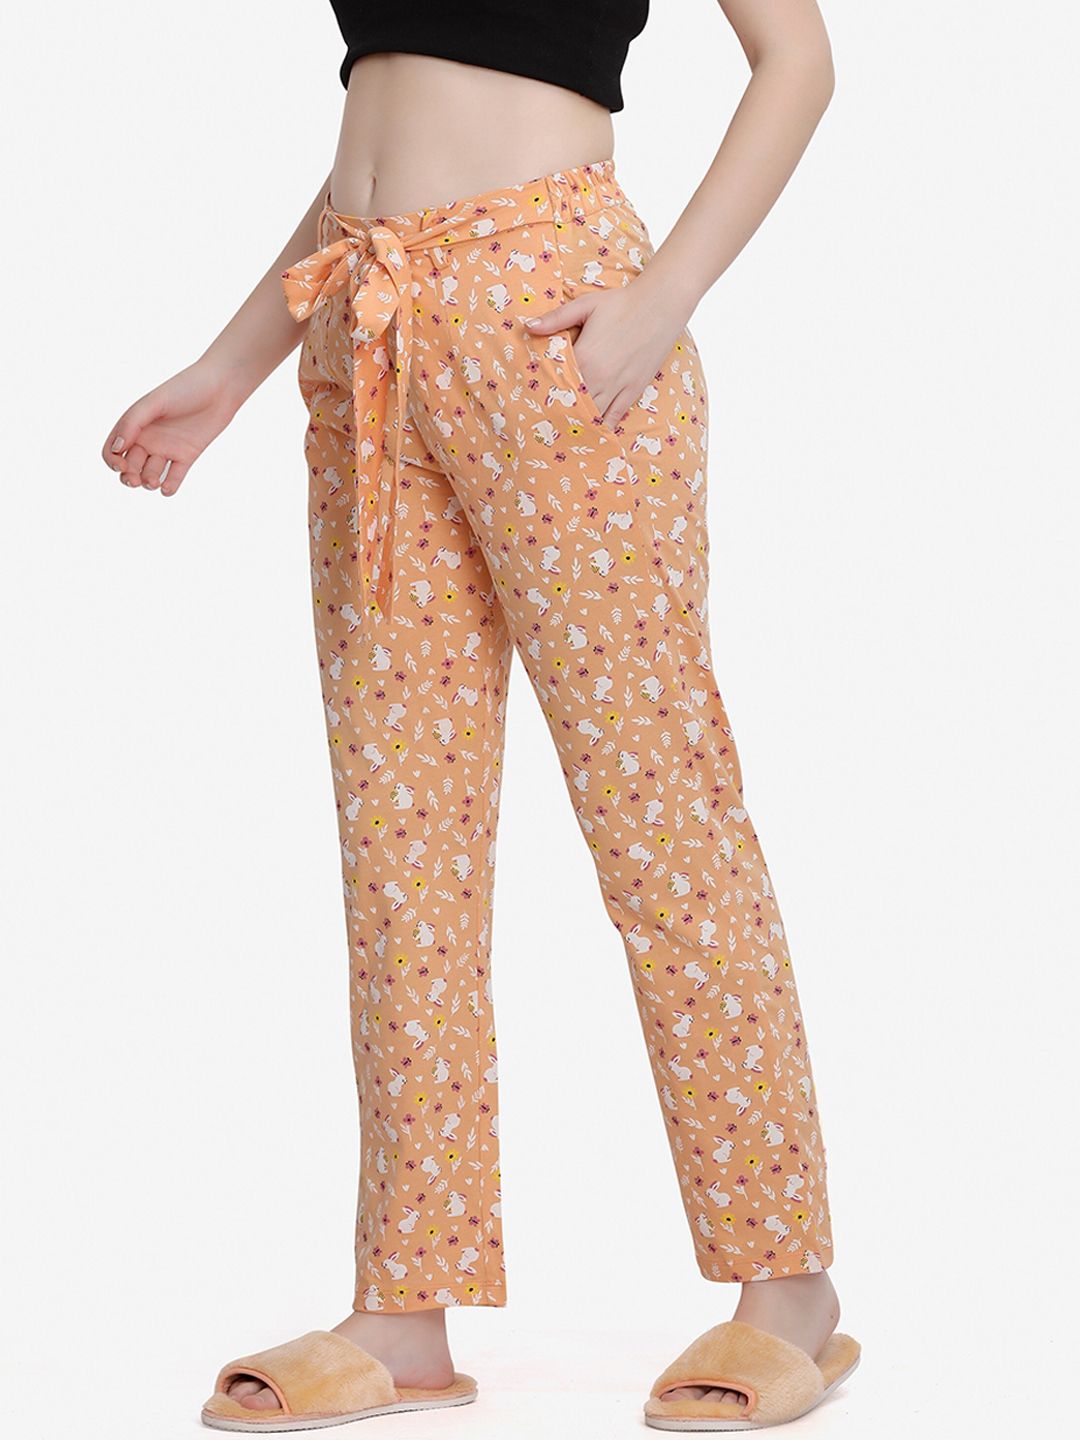 MAYSIXTY Women Peach Colored Printed Cotton Lounge Pants Price in India